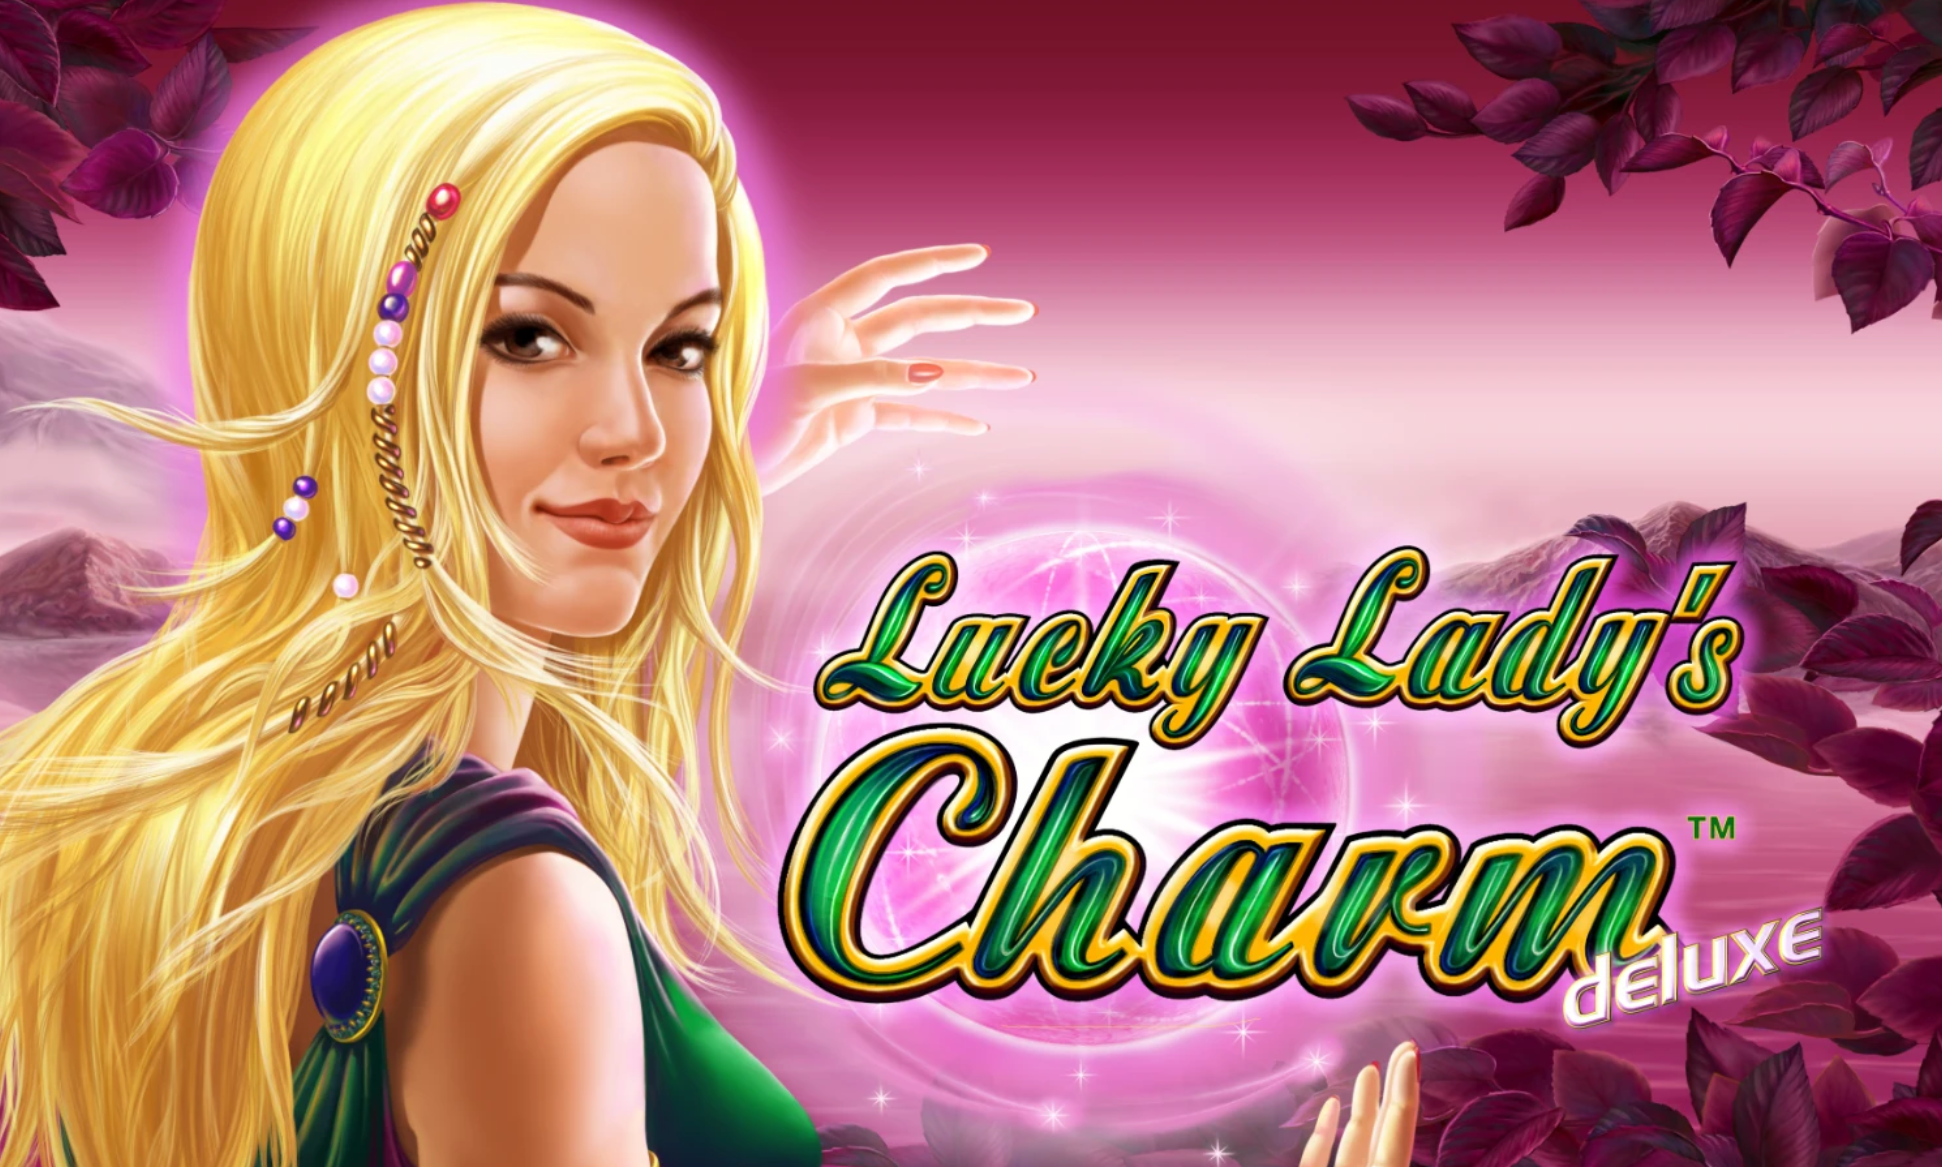 Lucky lady's charm deluxe slot